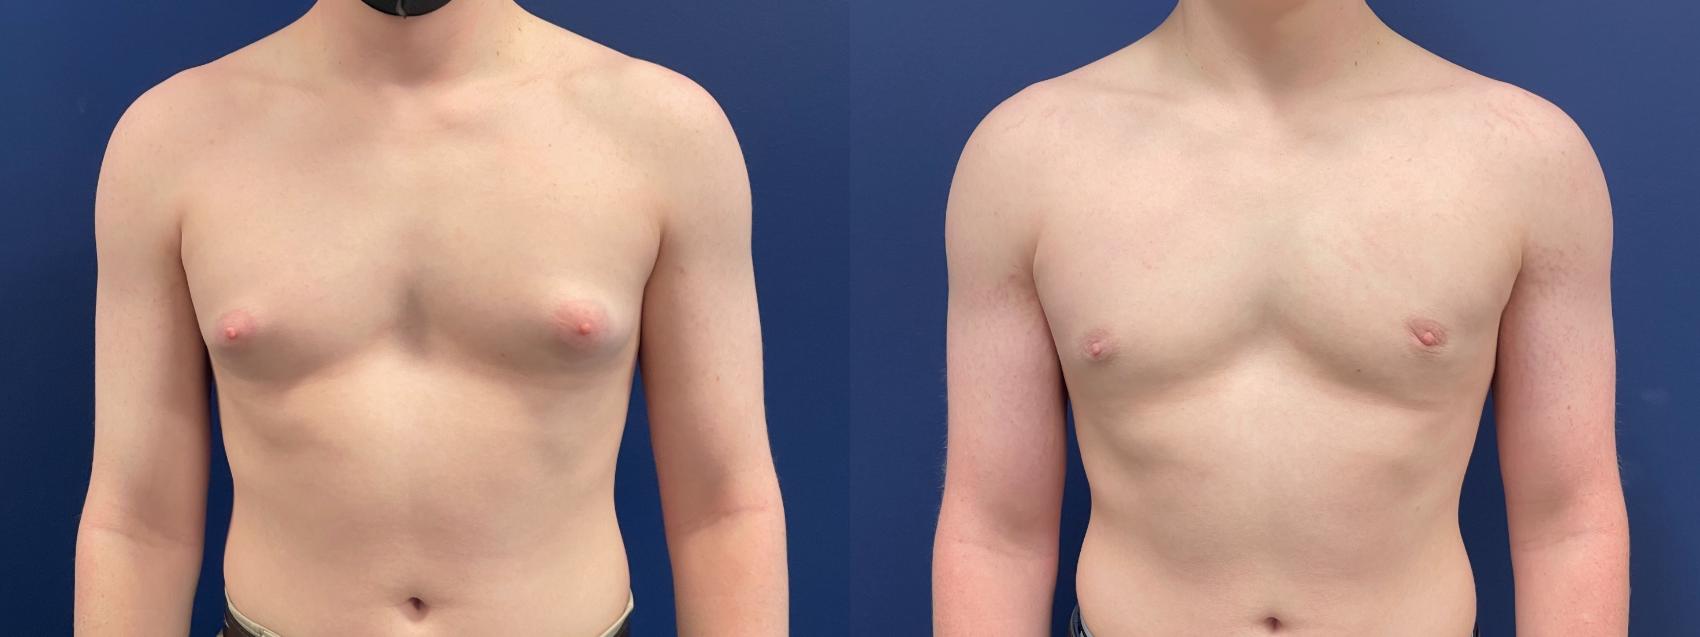 Male Breast Reduction / Gynecomastia Case 214 Before & After Front | Chevy Chase & Annandale, Washington D.C. Metropolitan Area | Center for Plastic Surgery